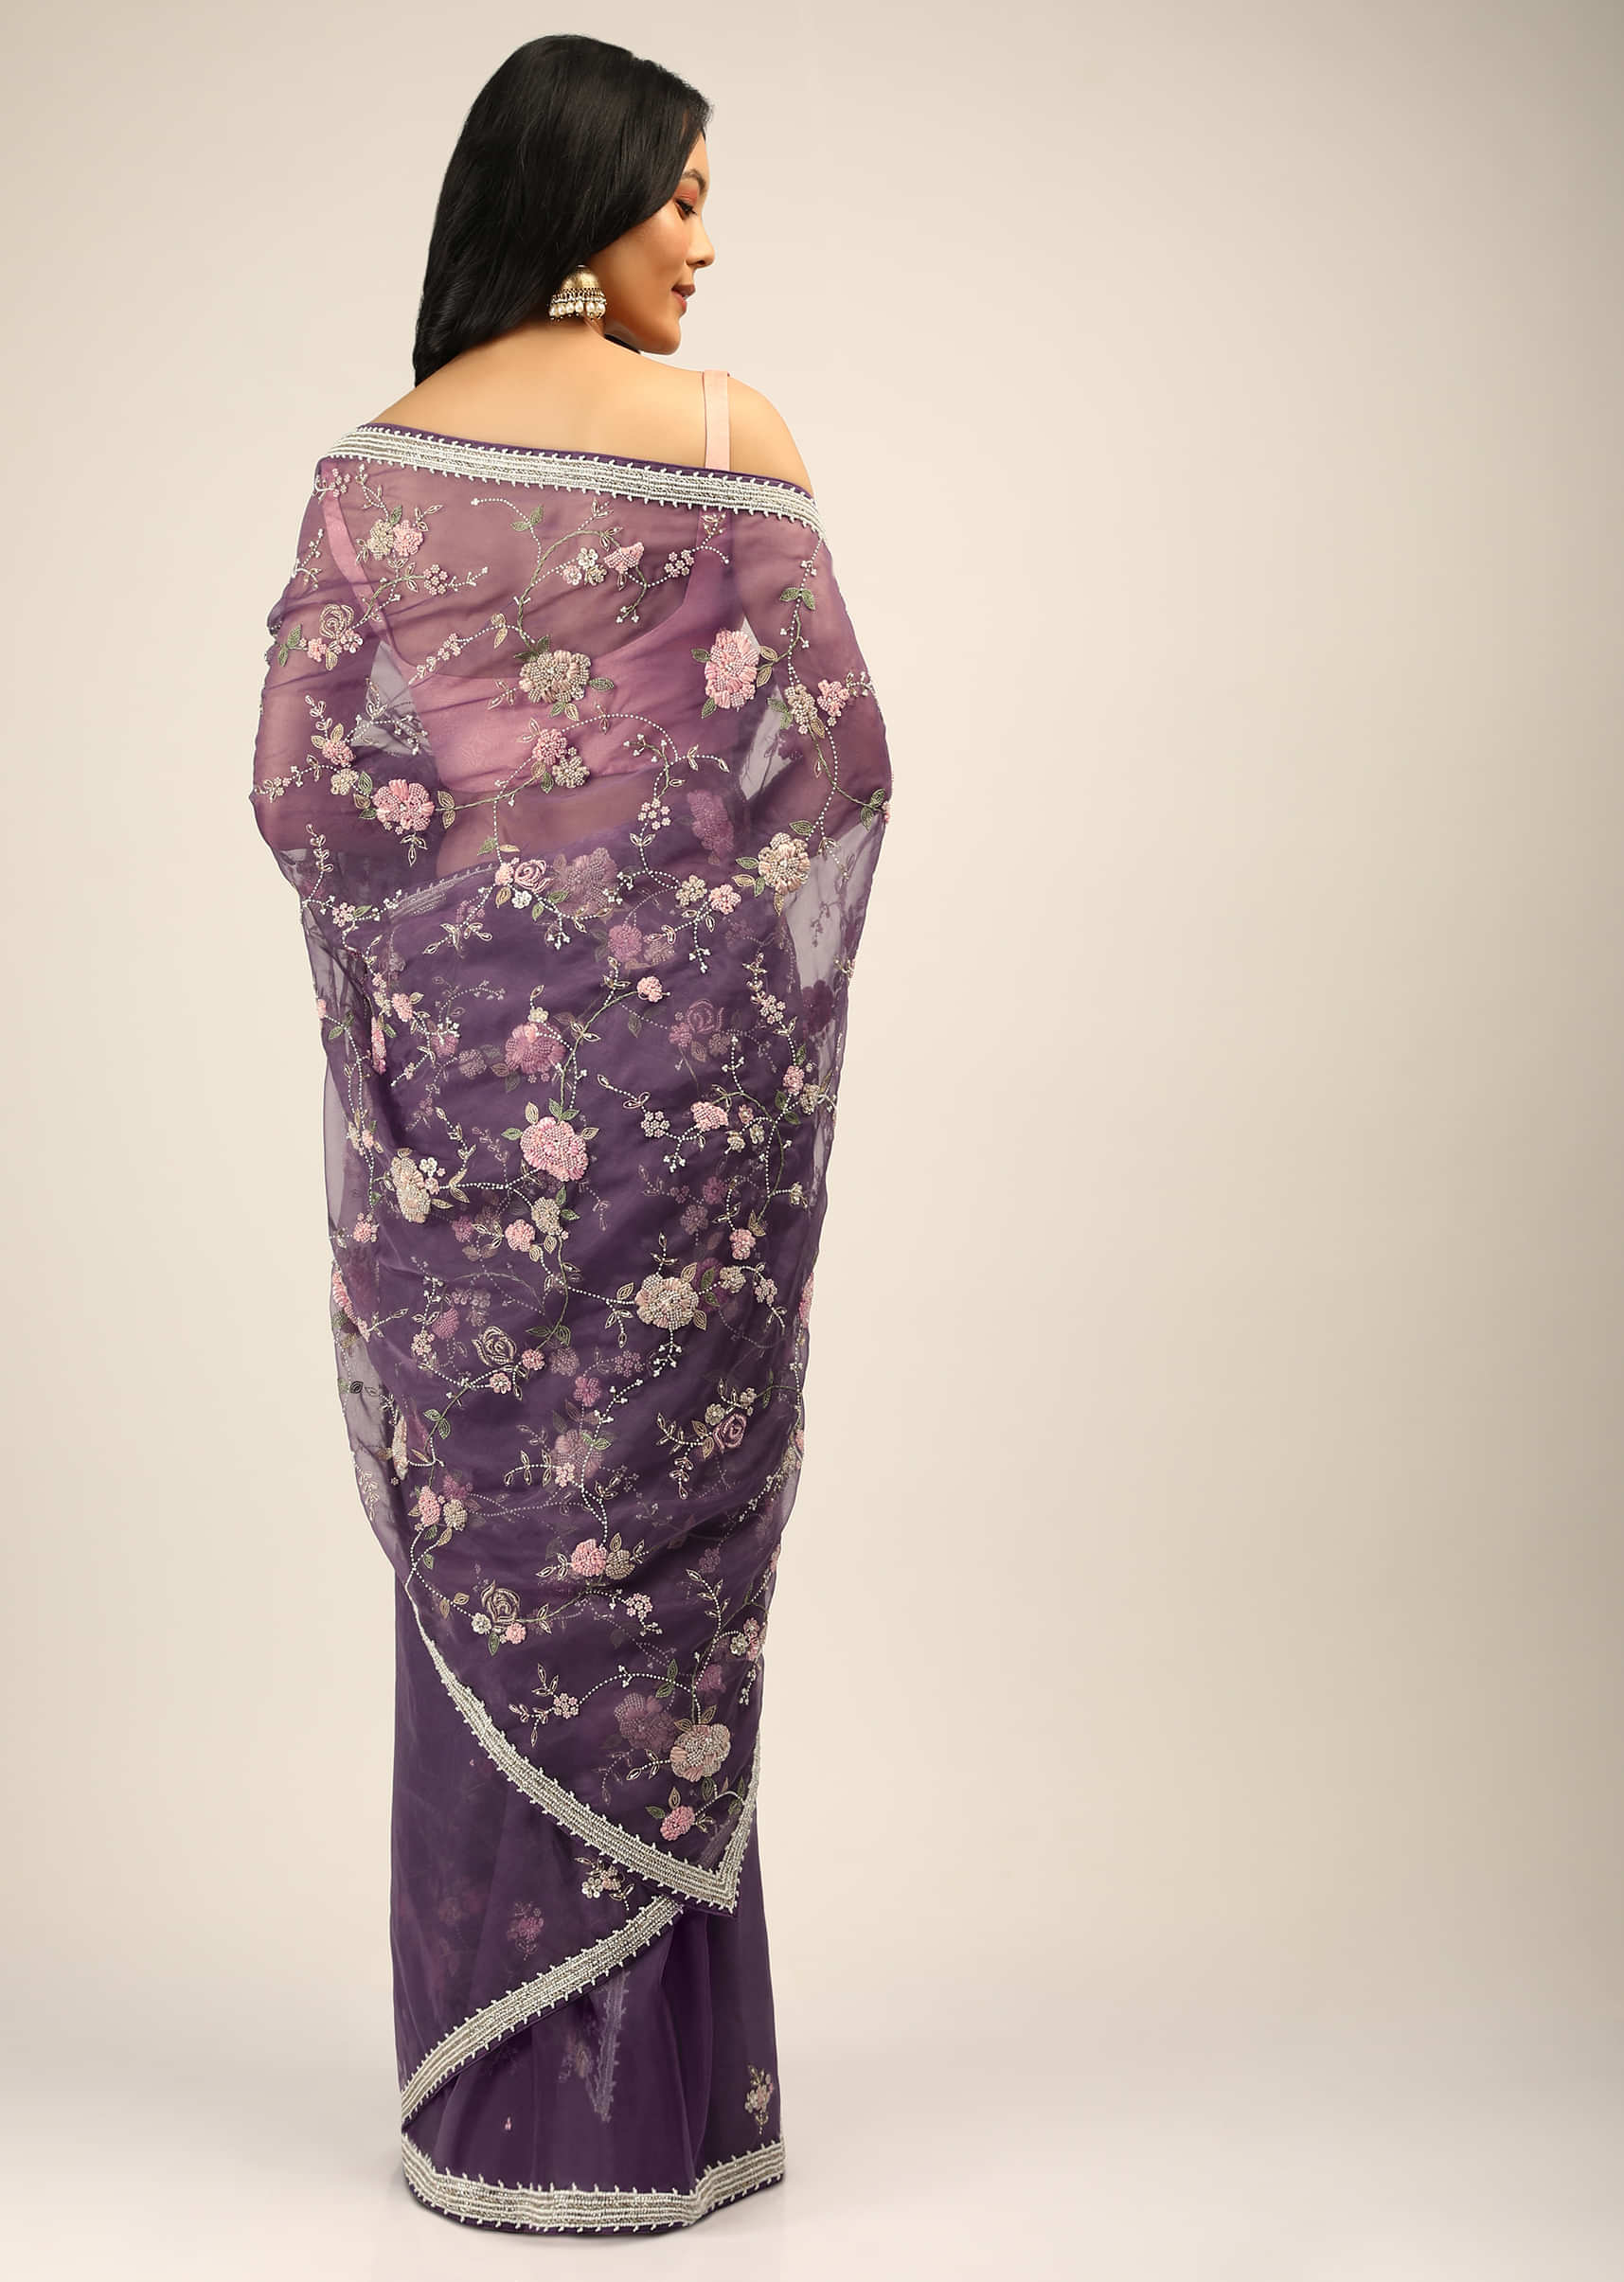 Royal Purple Saree In Organza With Moti, Resham And Cord Embroidered Floral Motifs On The Pallu  